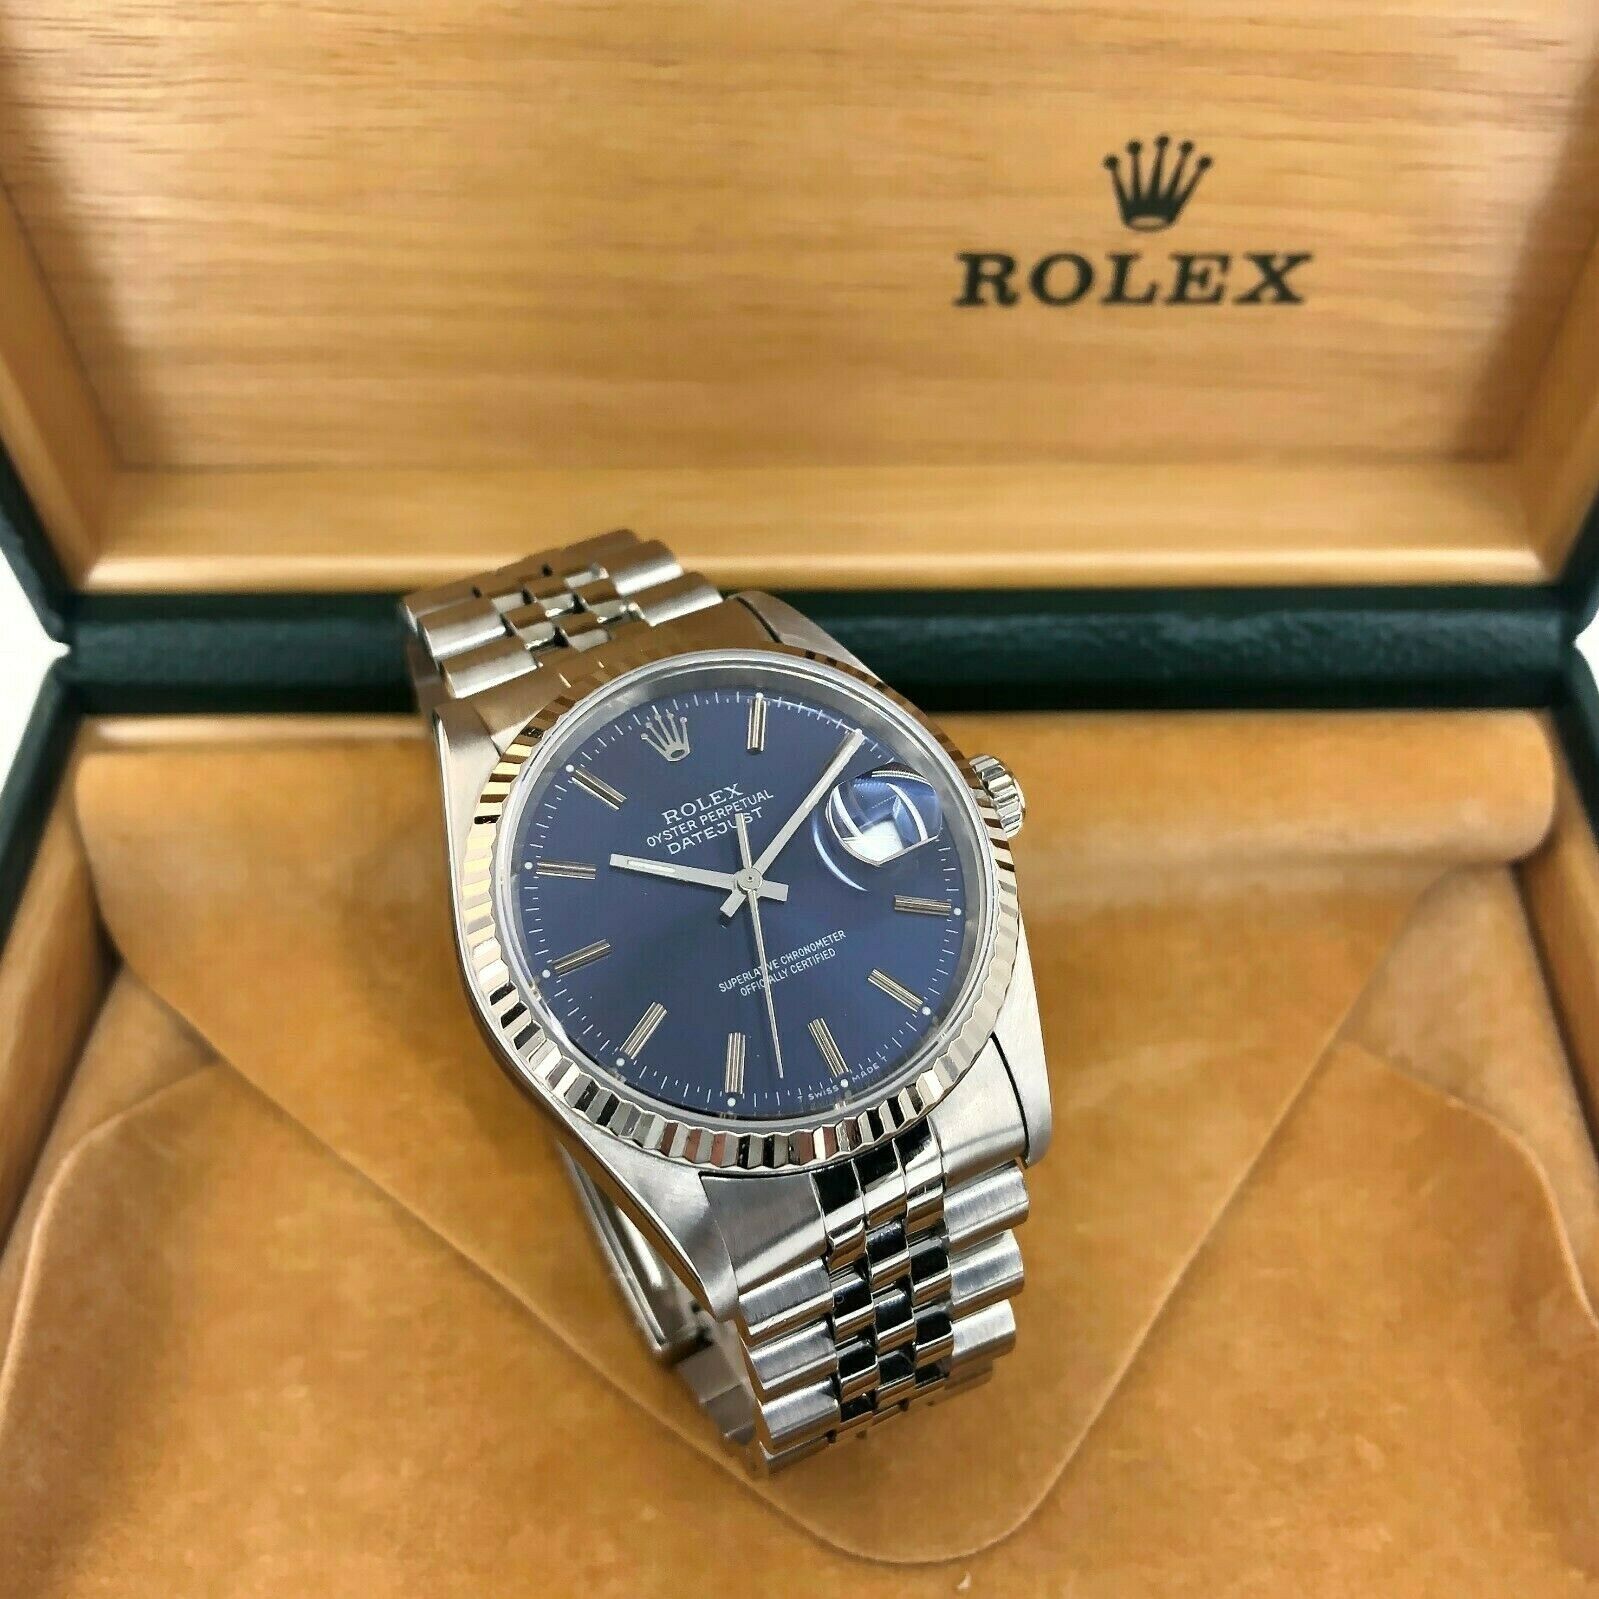 Rolex 36MM Datejust Watch 18K White Gold Stainless Steel Ref #16234 Box Papers